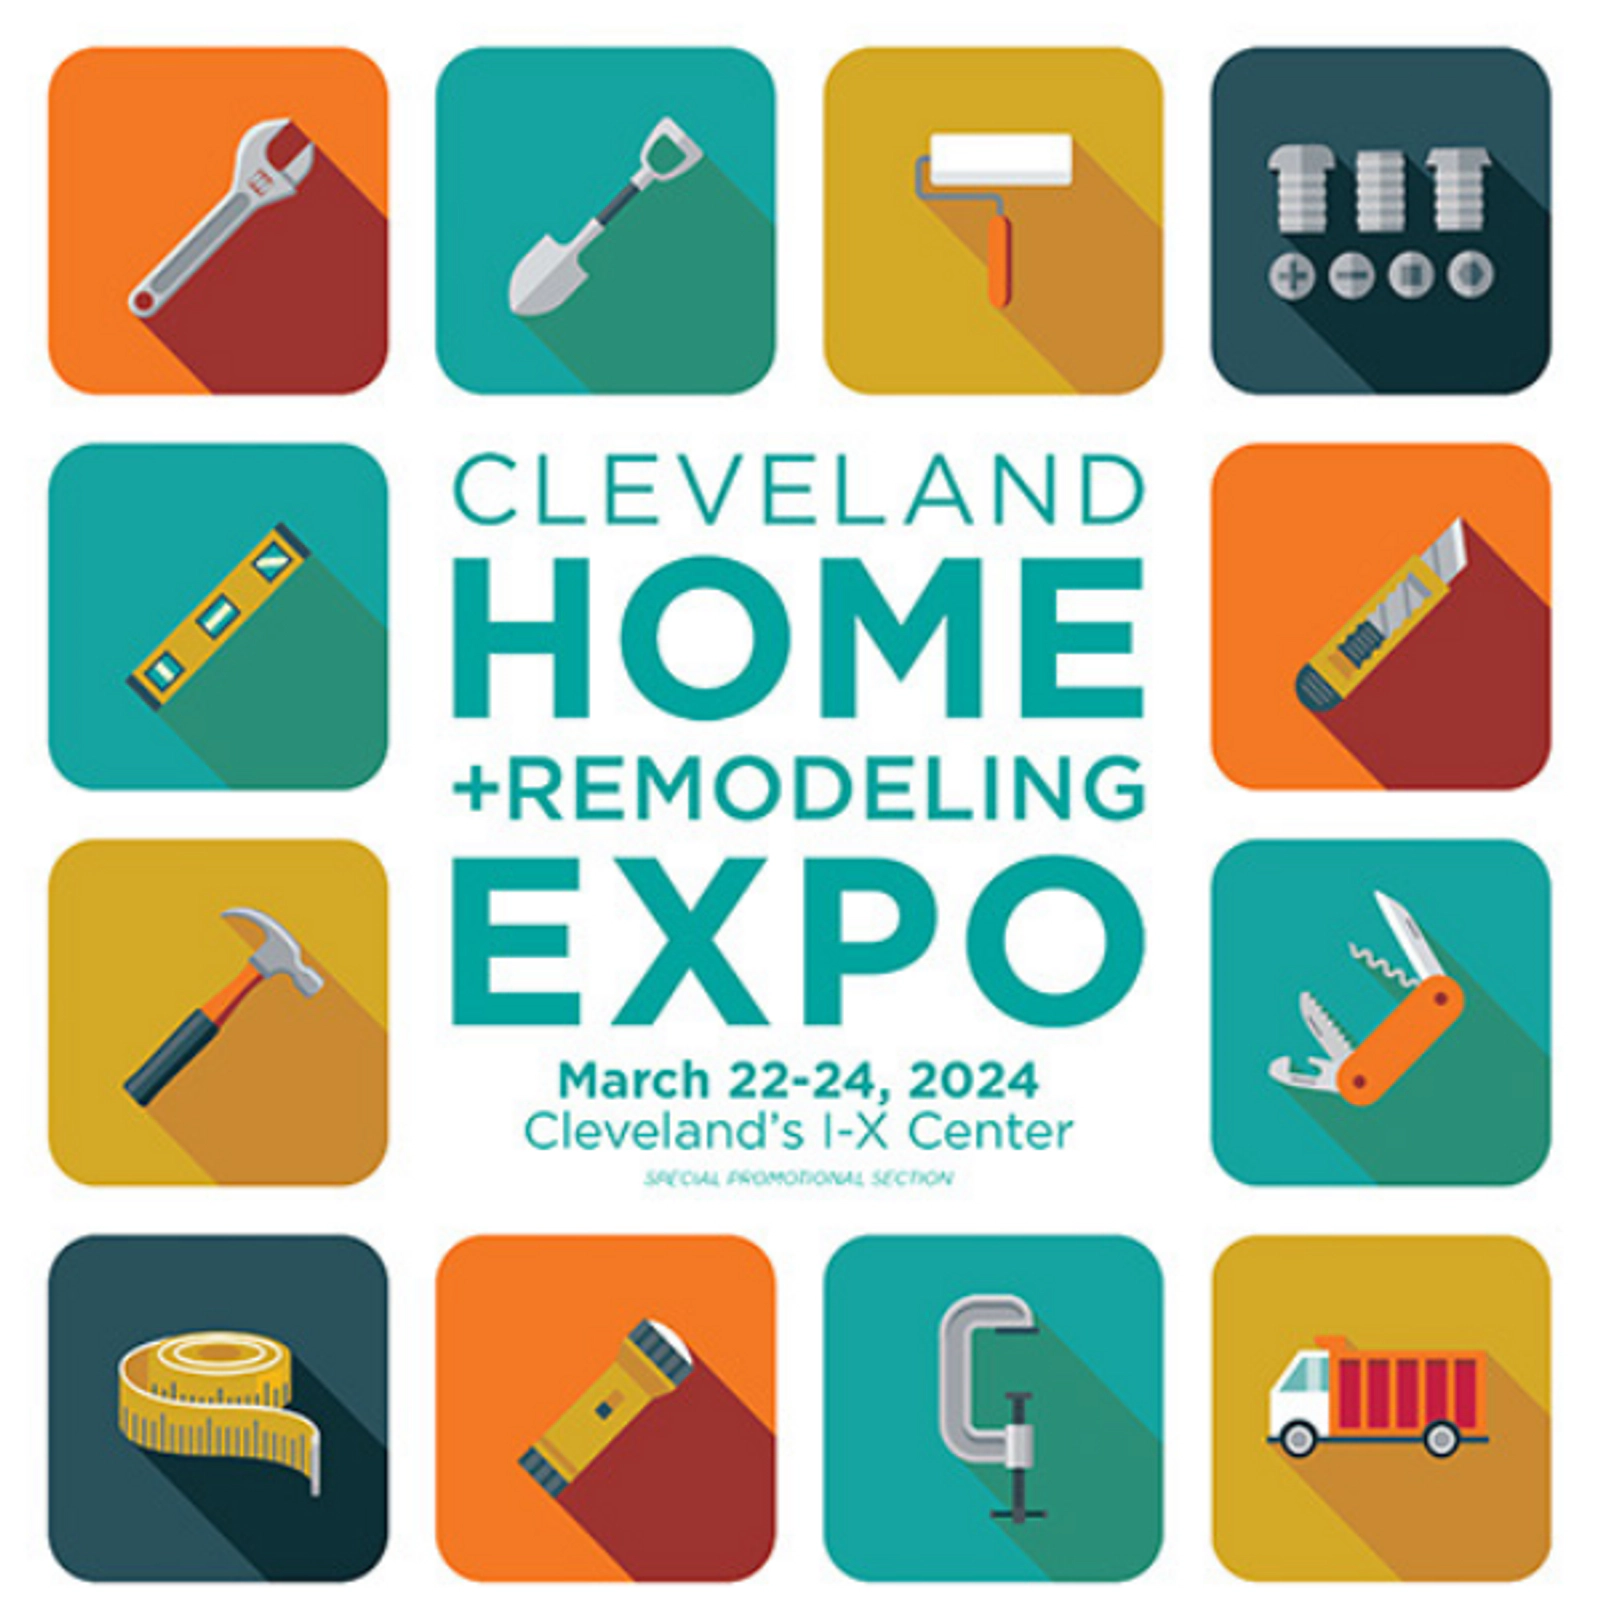 The Cleveland Home and Remodeling Expo